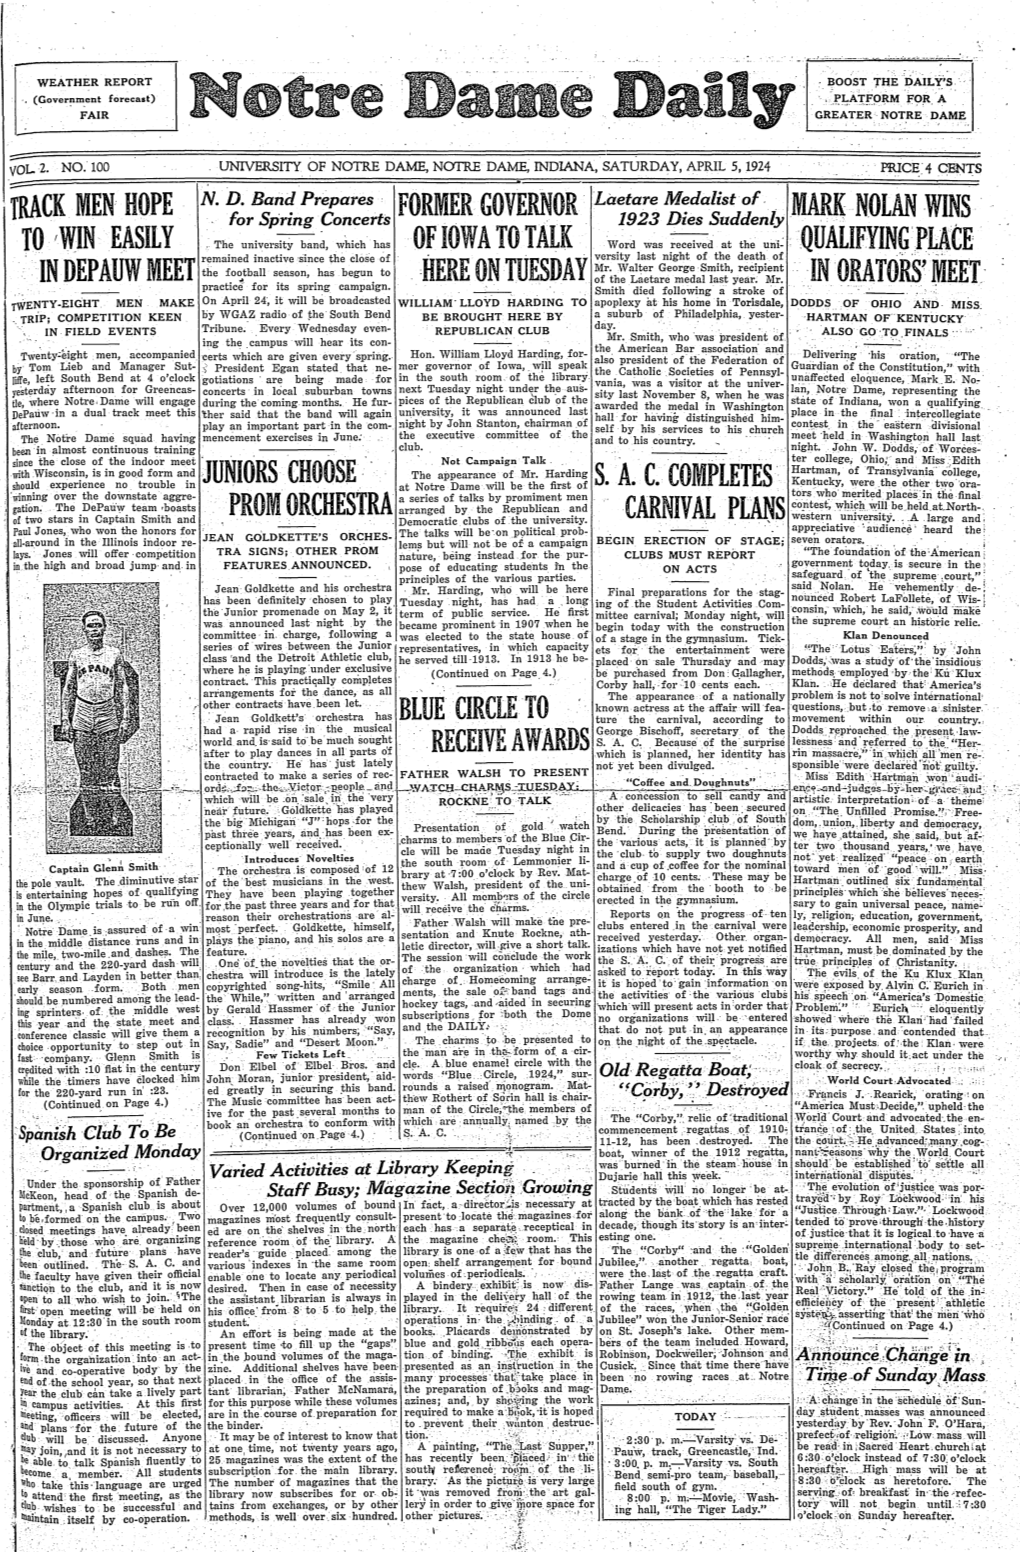 Notre Dame Daily 1924-04-05